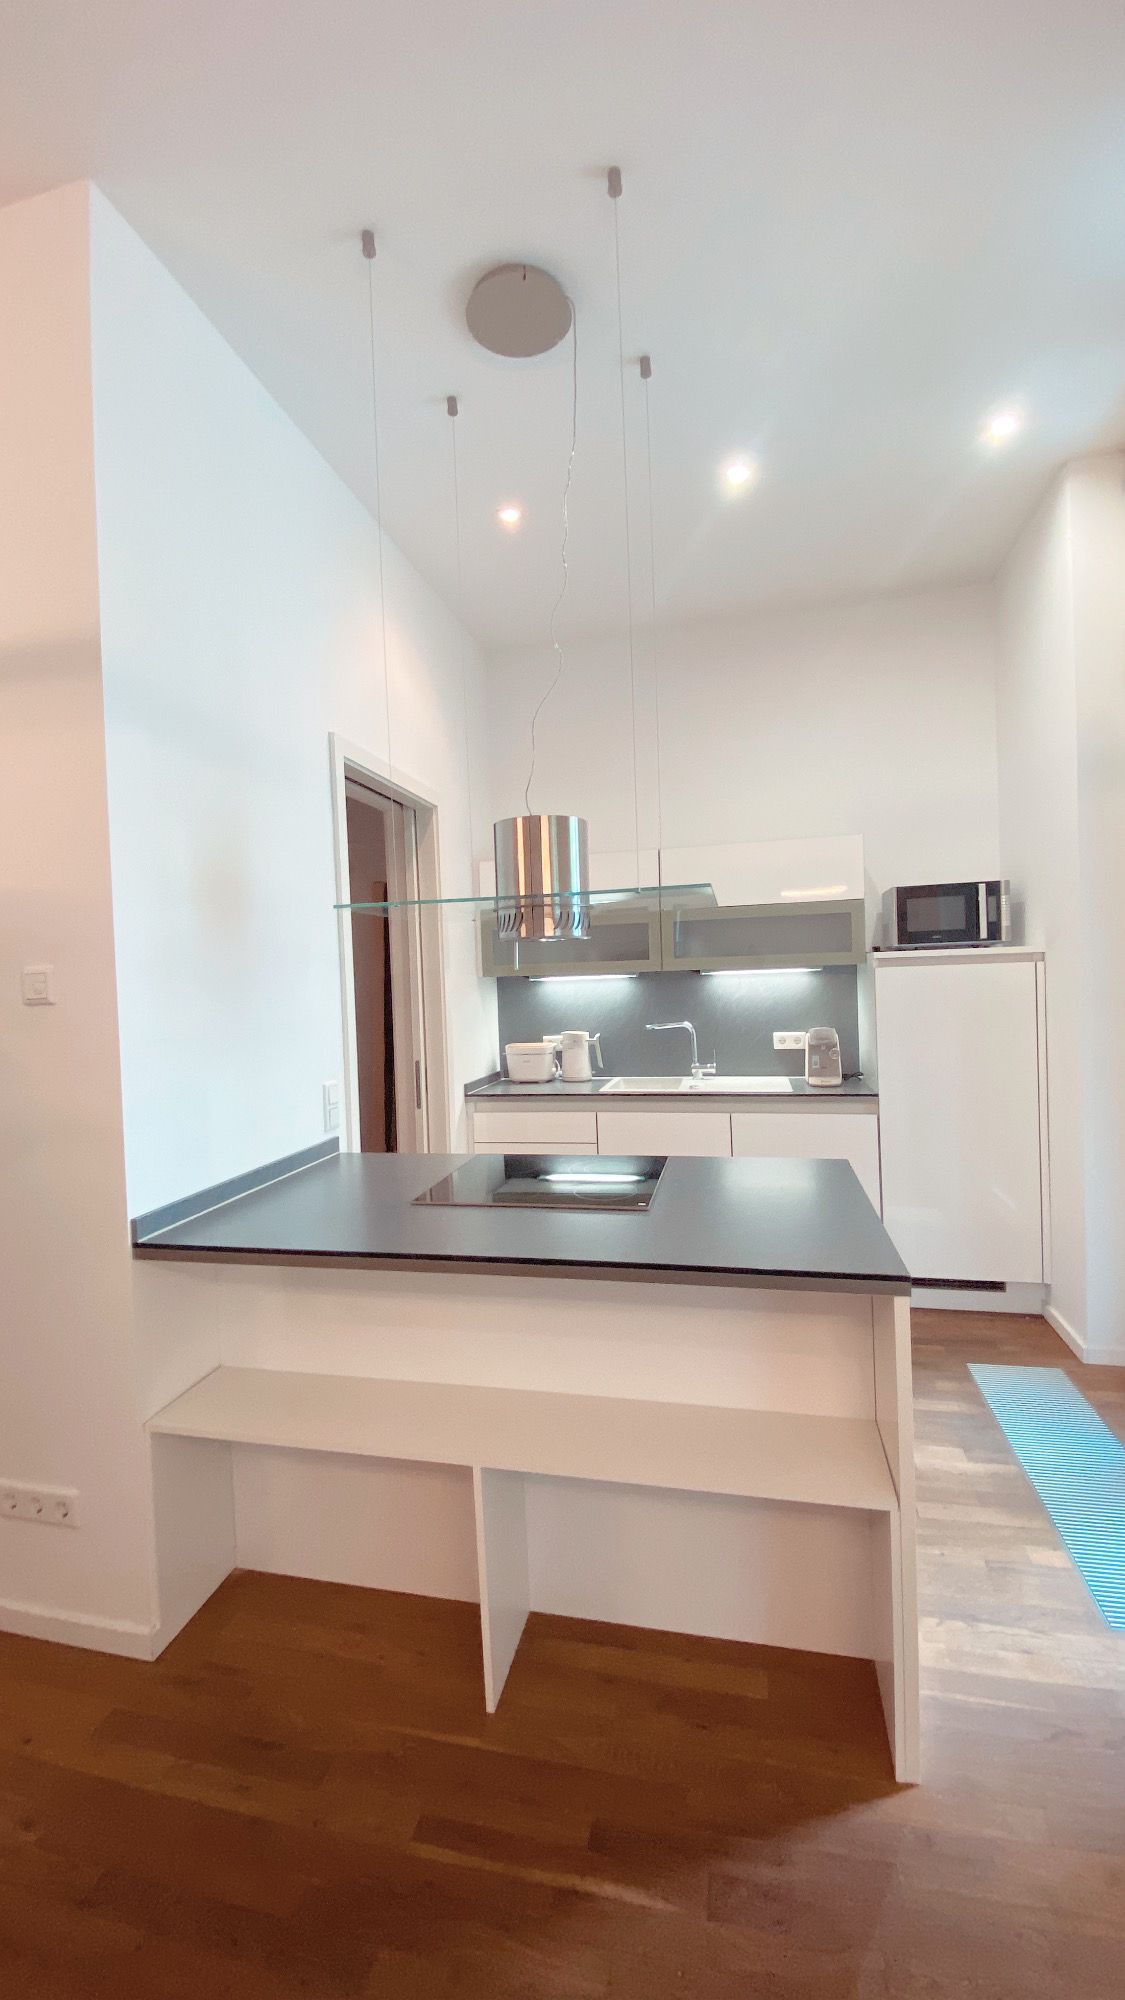 Exclusive apartment in the heart of Berlin including a garage parking space.